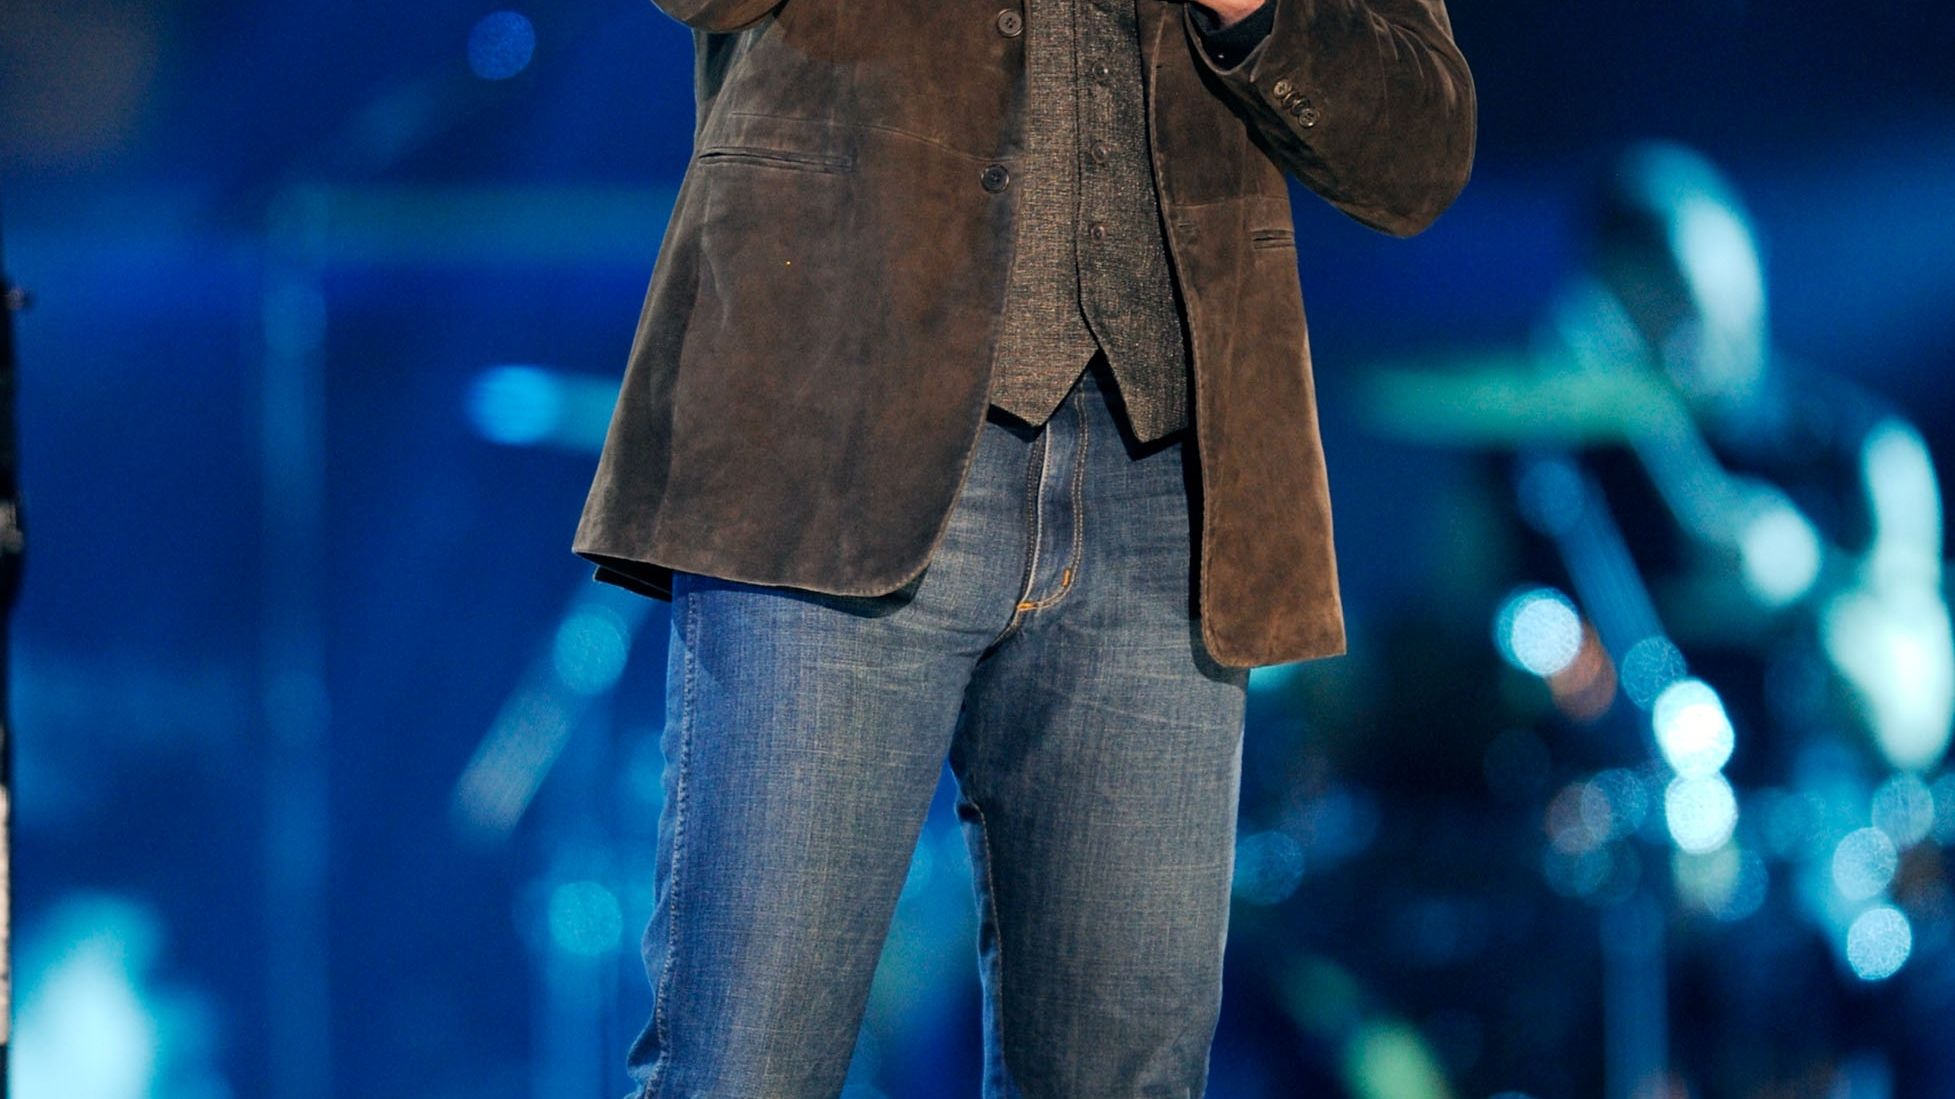 "I love you, Dad, and I dedicate this to you, man," Blake Shelton said at the 2011 American Country Awards.